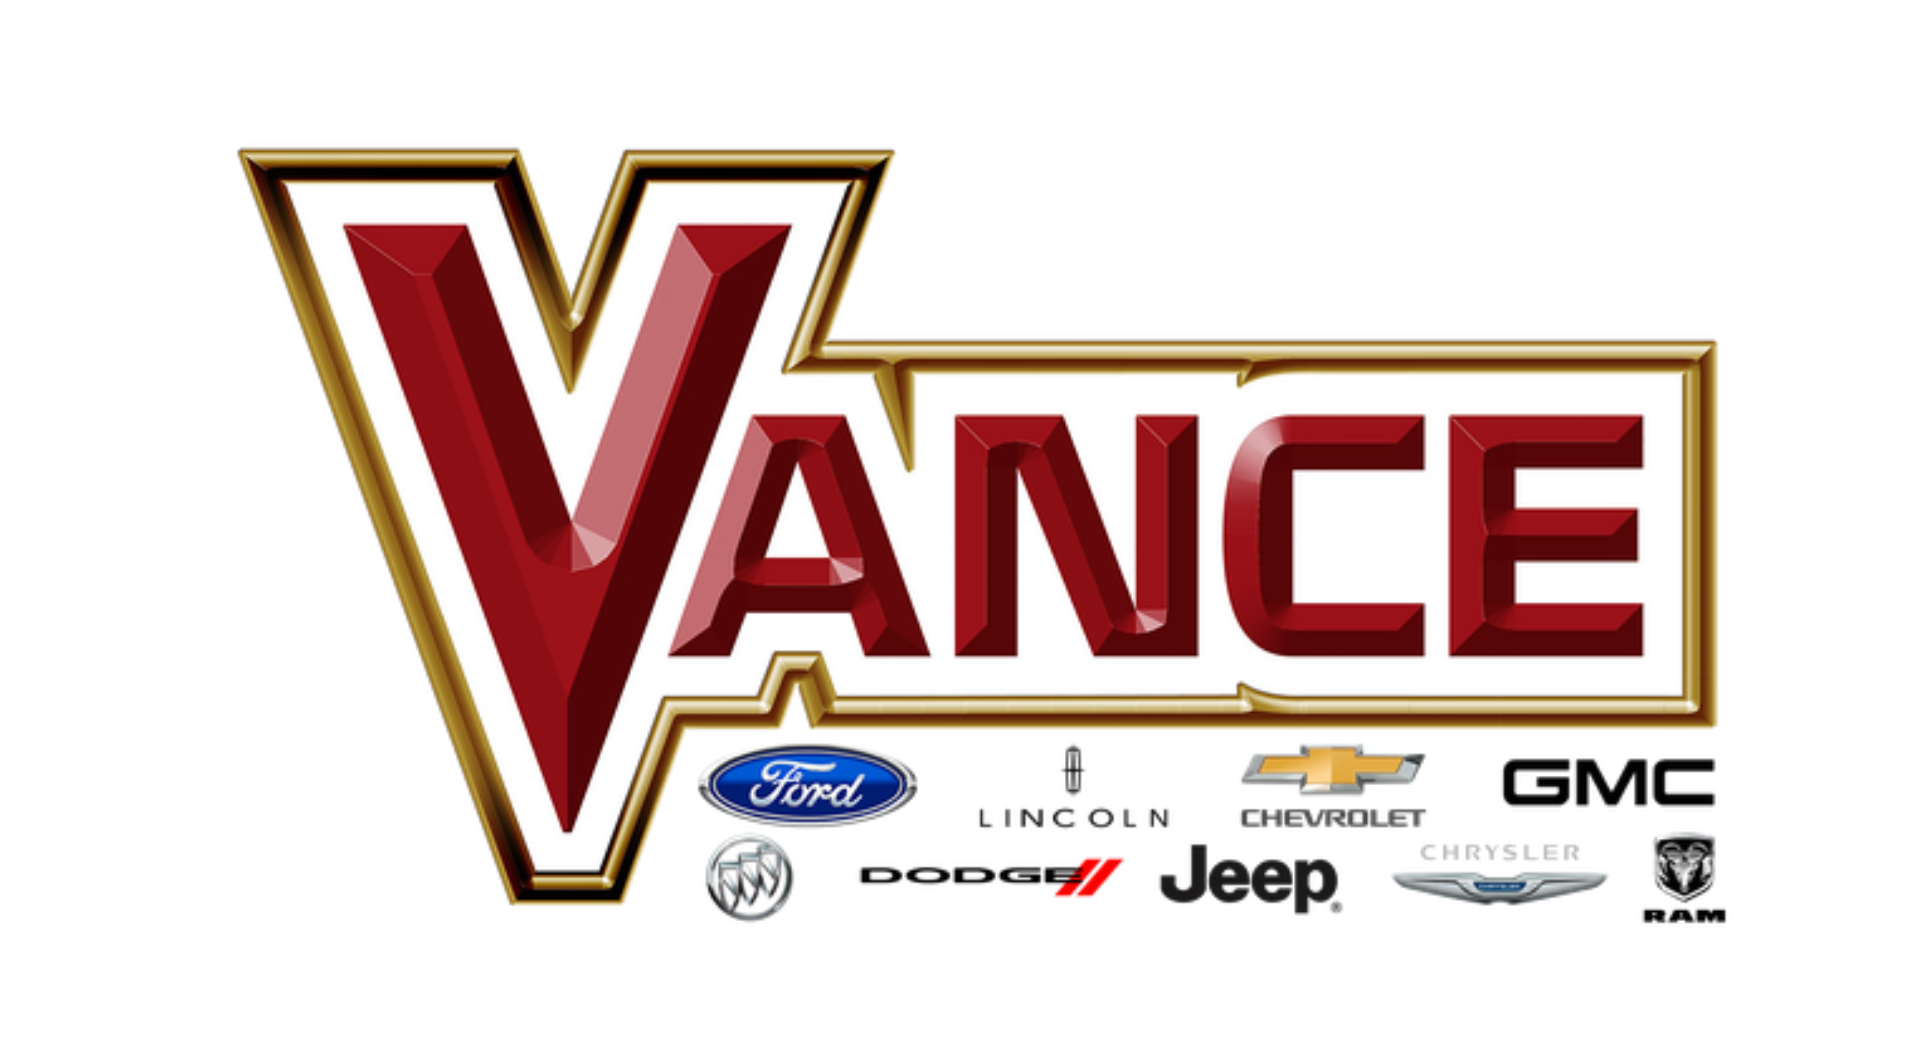 Vance CDJR and Vance Ford Lincoln are Certified Agriculture Dealerships